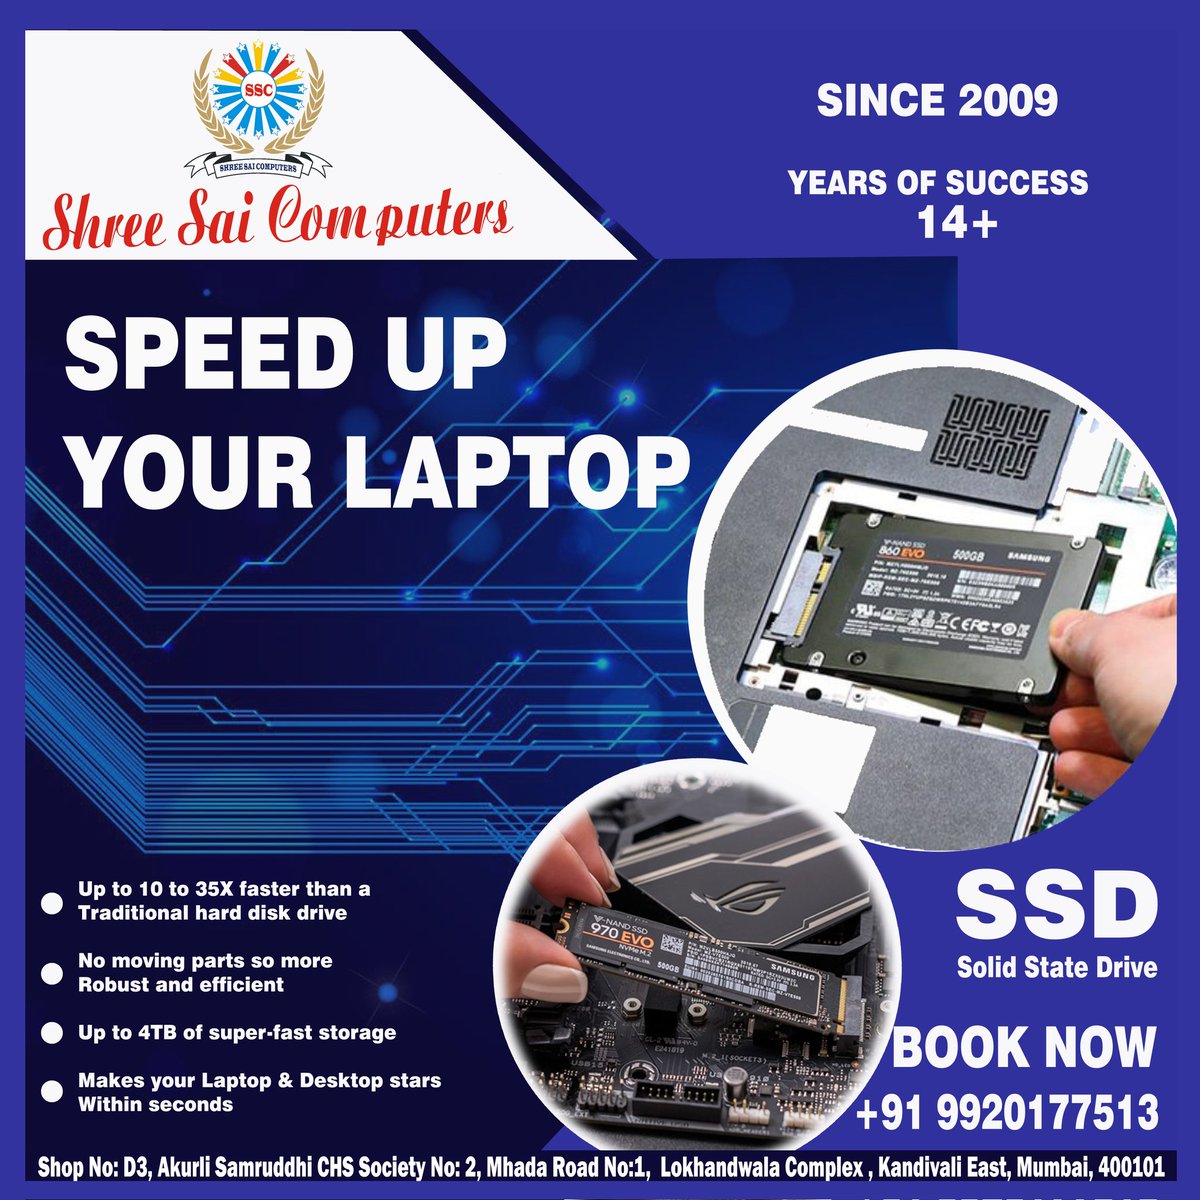 IF YOU WANT SPEED UP YOUR LAPTOP
SO PLZ CALL ME
099201 77513 
SHREE SAI COMPUTERS
LOKHANDWALA KANDIVAL
EAST Mumbai 400101.

#shreesaicomputers  #lokhandwala #kandivalieast #laptoplifestyle #laptoprepair 
#computer #computertechnician #LaptopRepairServices